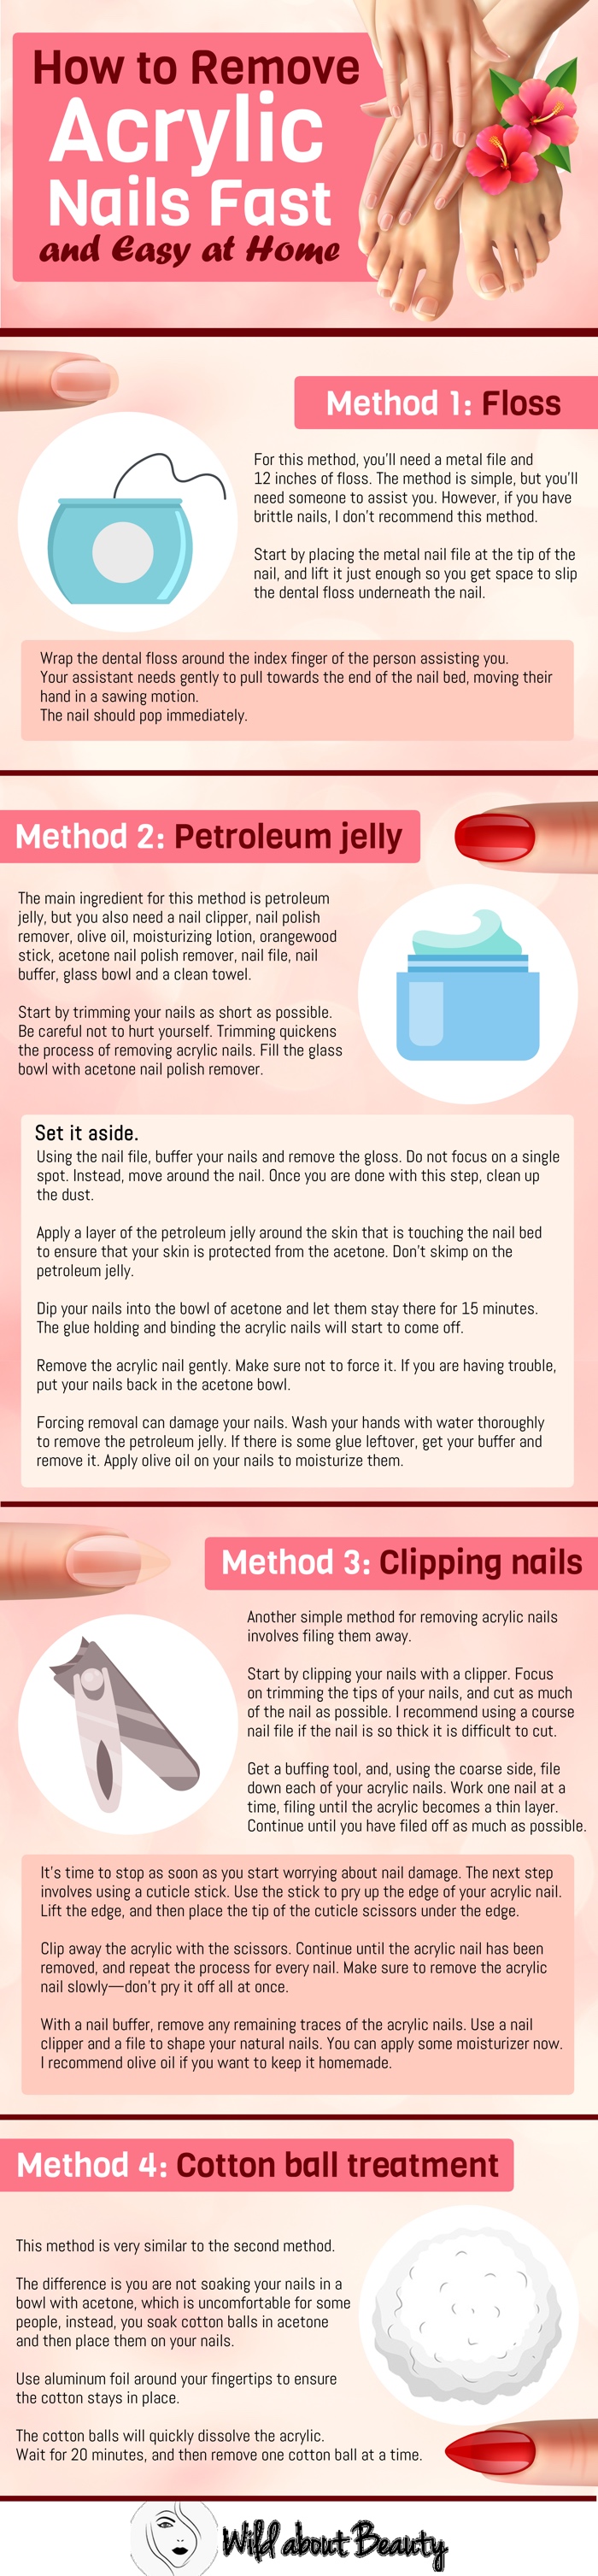 How to Remove Acrylic Nails Fast and Easy at Home - Wild About Beauty